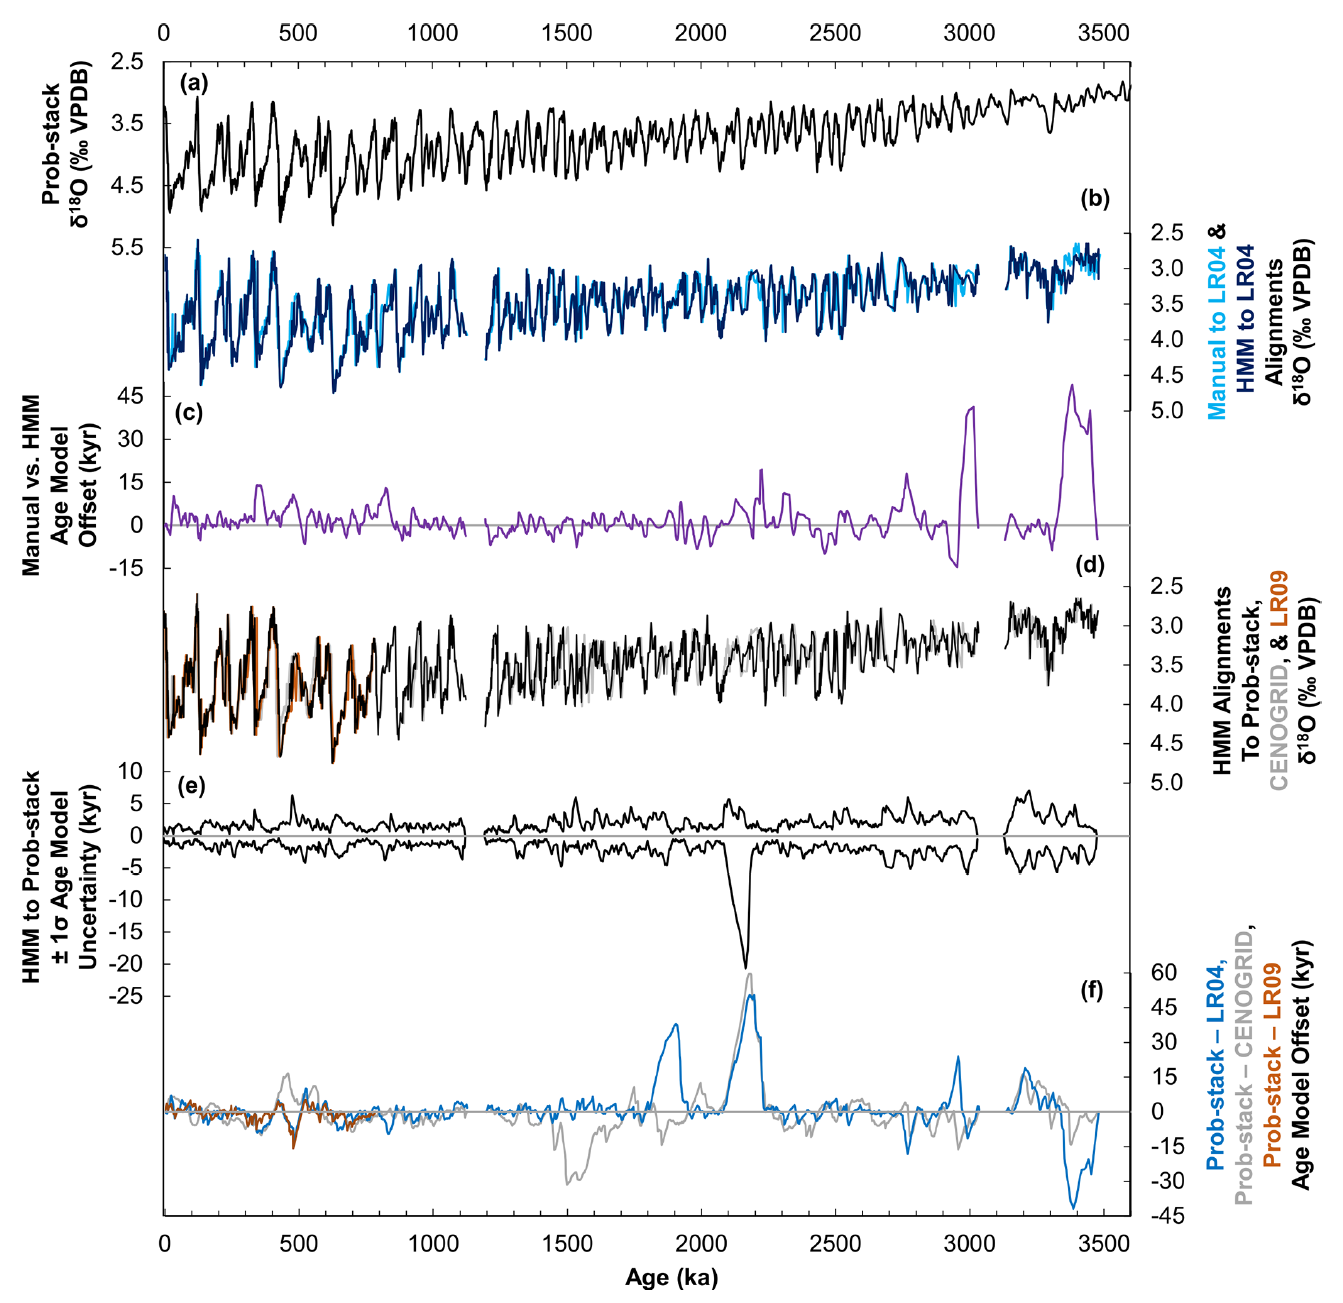 Oxygen isotope data and age model alignments for IODP Site U1541